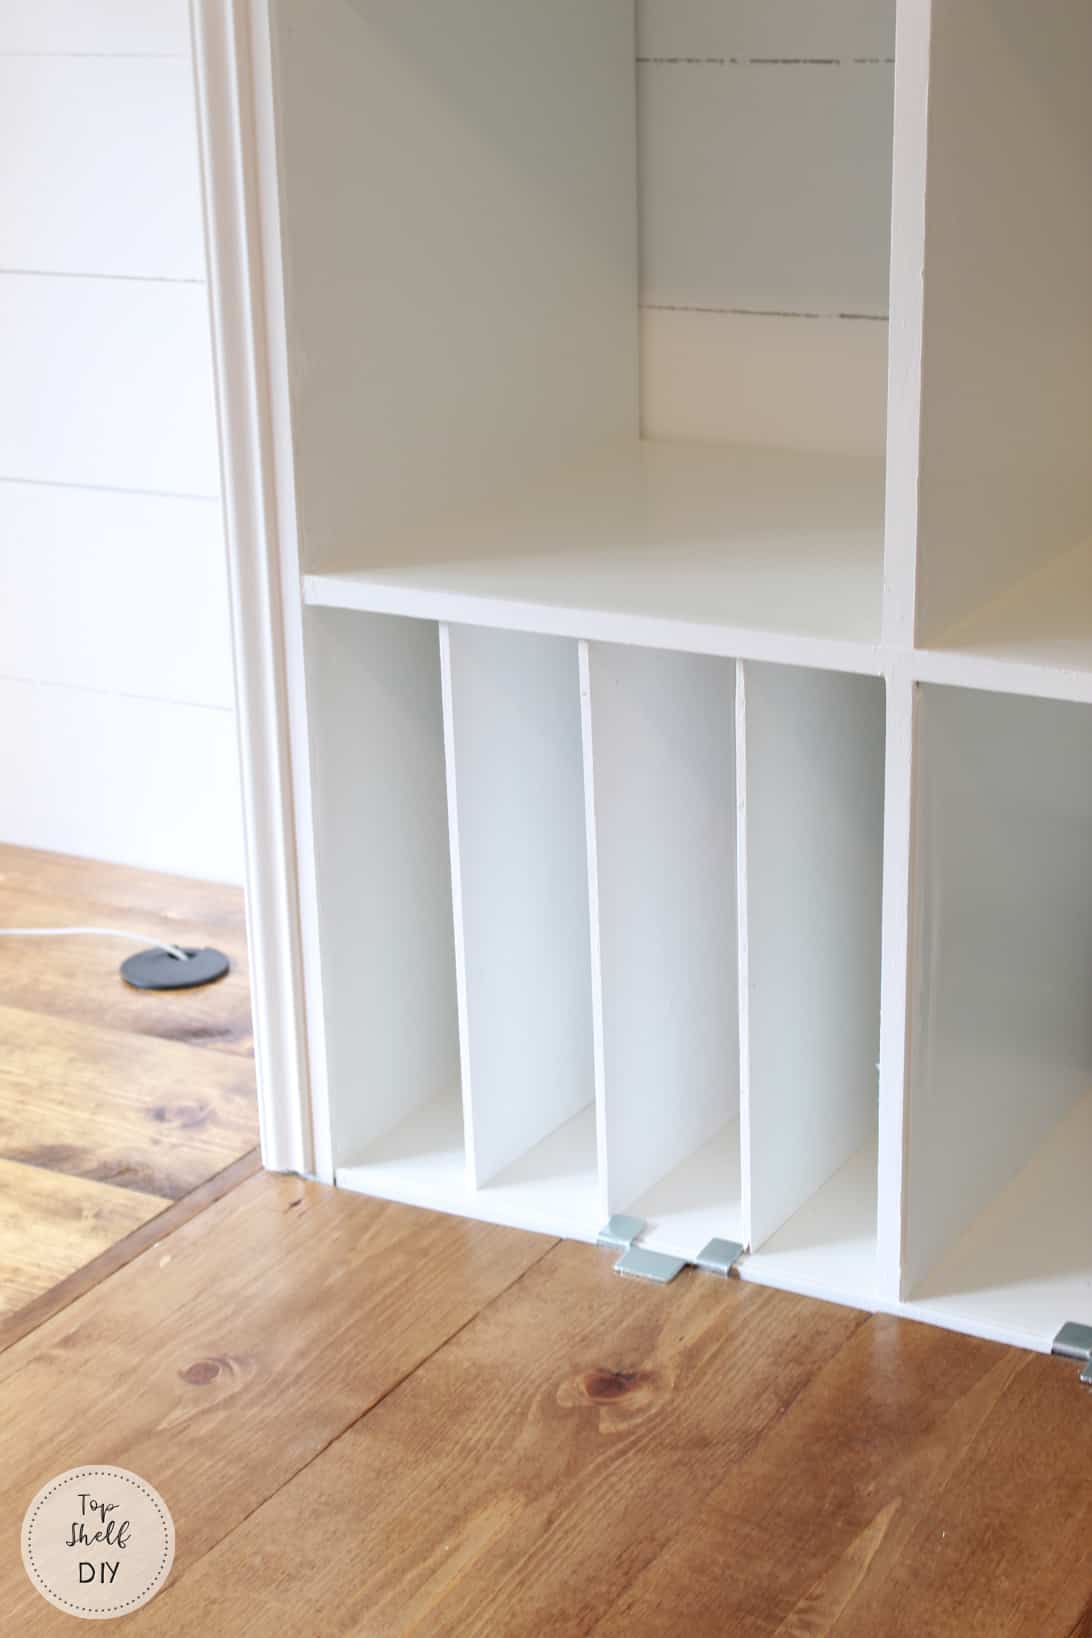 Add built-in organization with dividers made from plywood! Secured by small strips of wood inside. #ikeahack #kallax